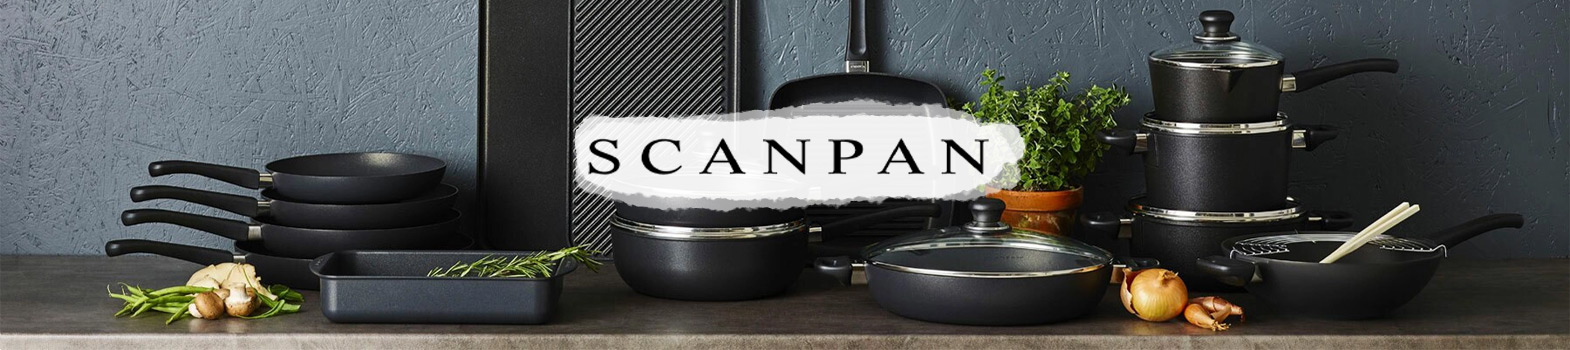 Scanpan Cookware, Knives, Accessories & More